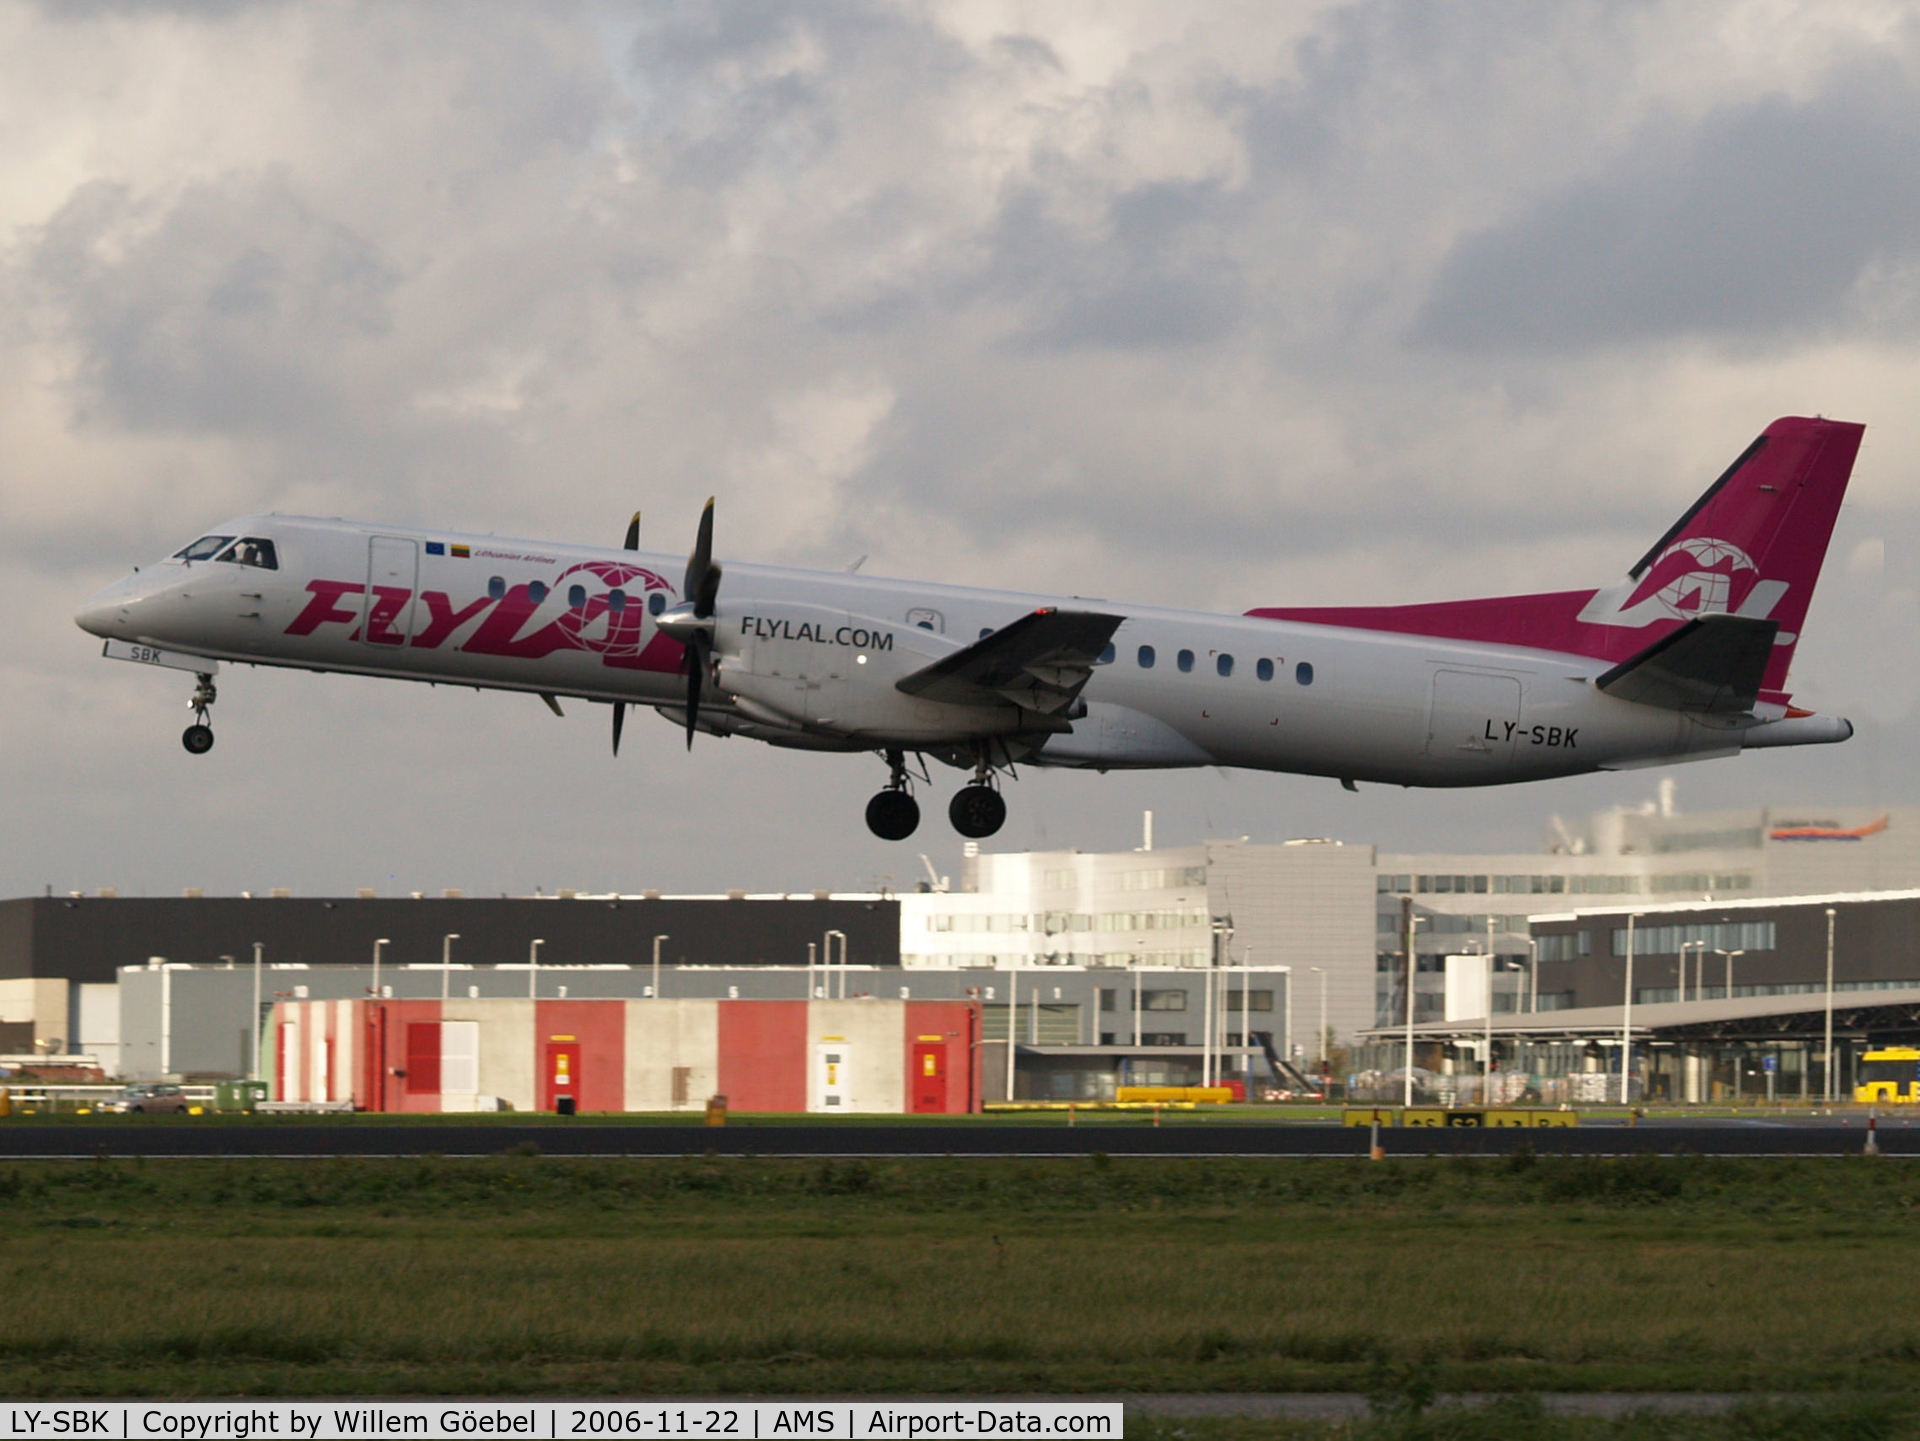 LY-SBK, 1996 Saab 2000 C/N 2000-035, Take off from runway 24 of Amsterdam Airport